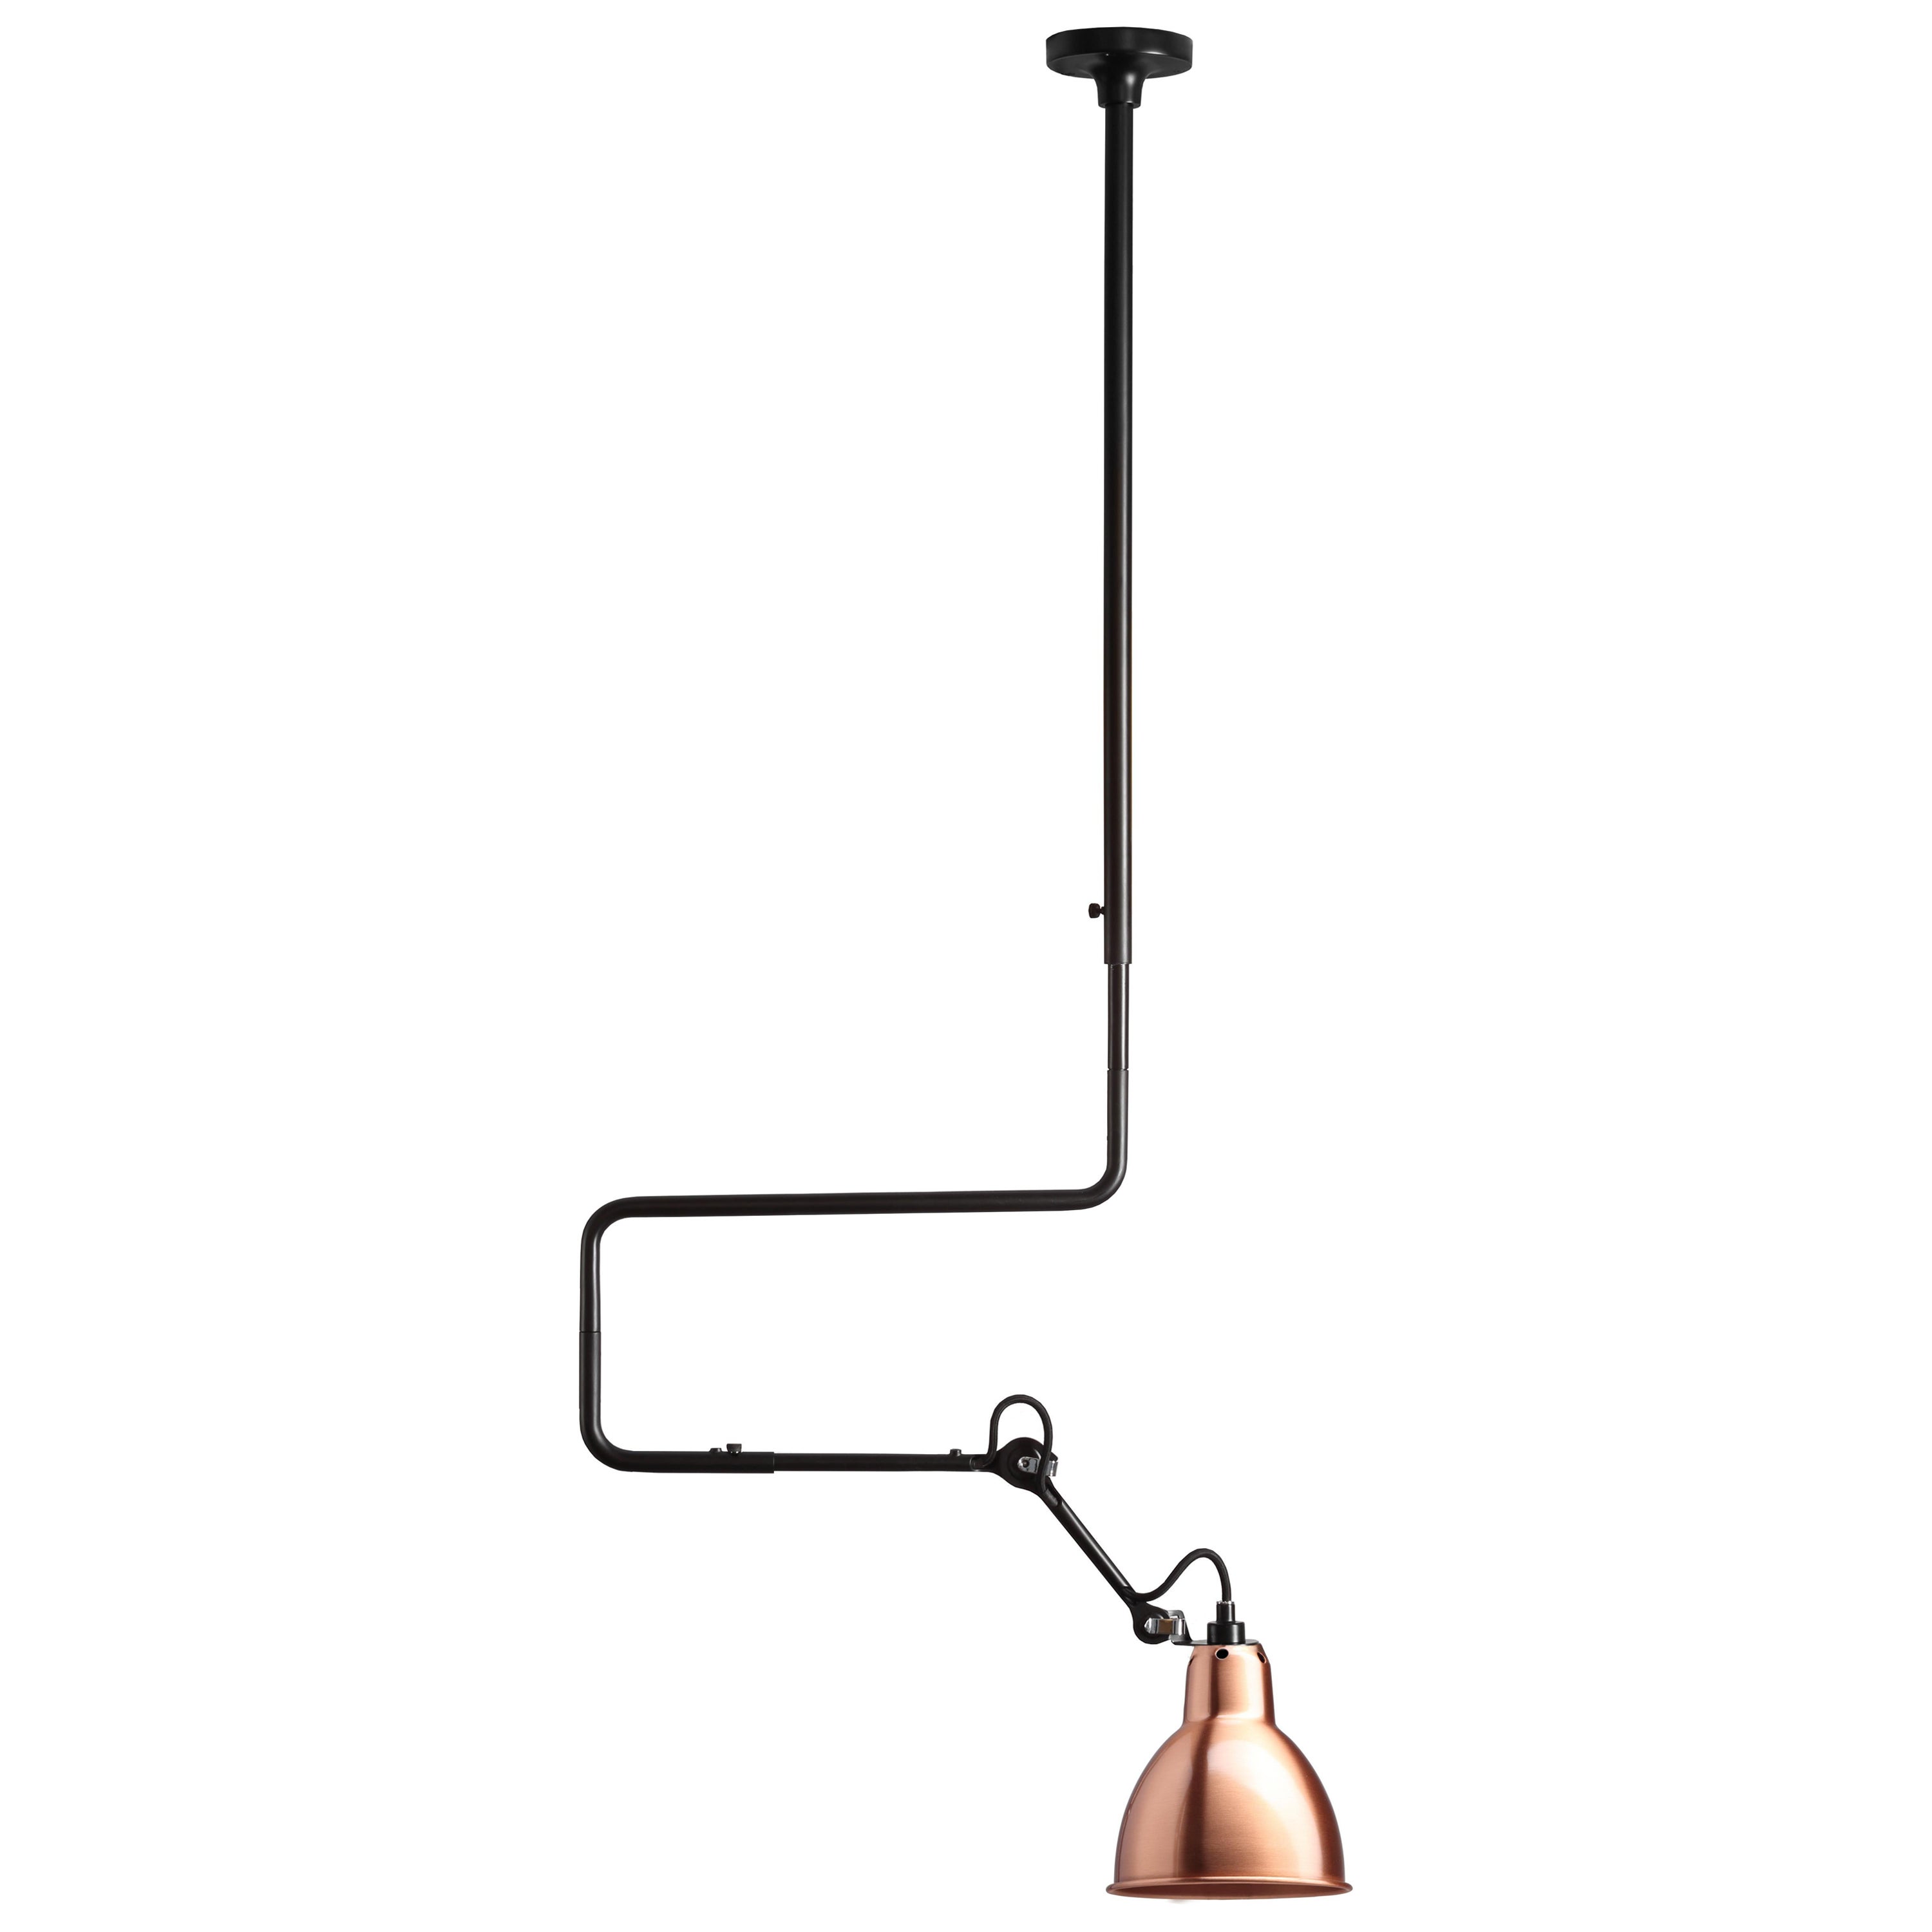 DCW Editions La Lampe Gras N°312 L Pendant Lamp in Black Arm and Copper Shade